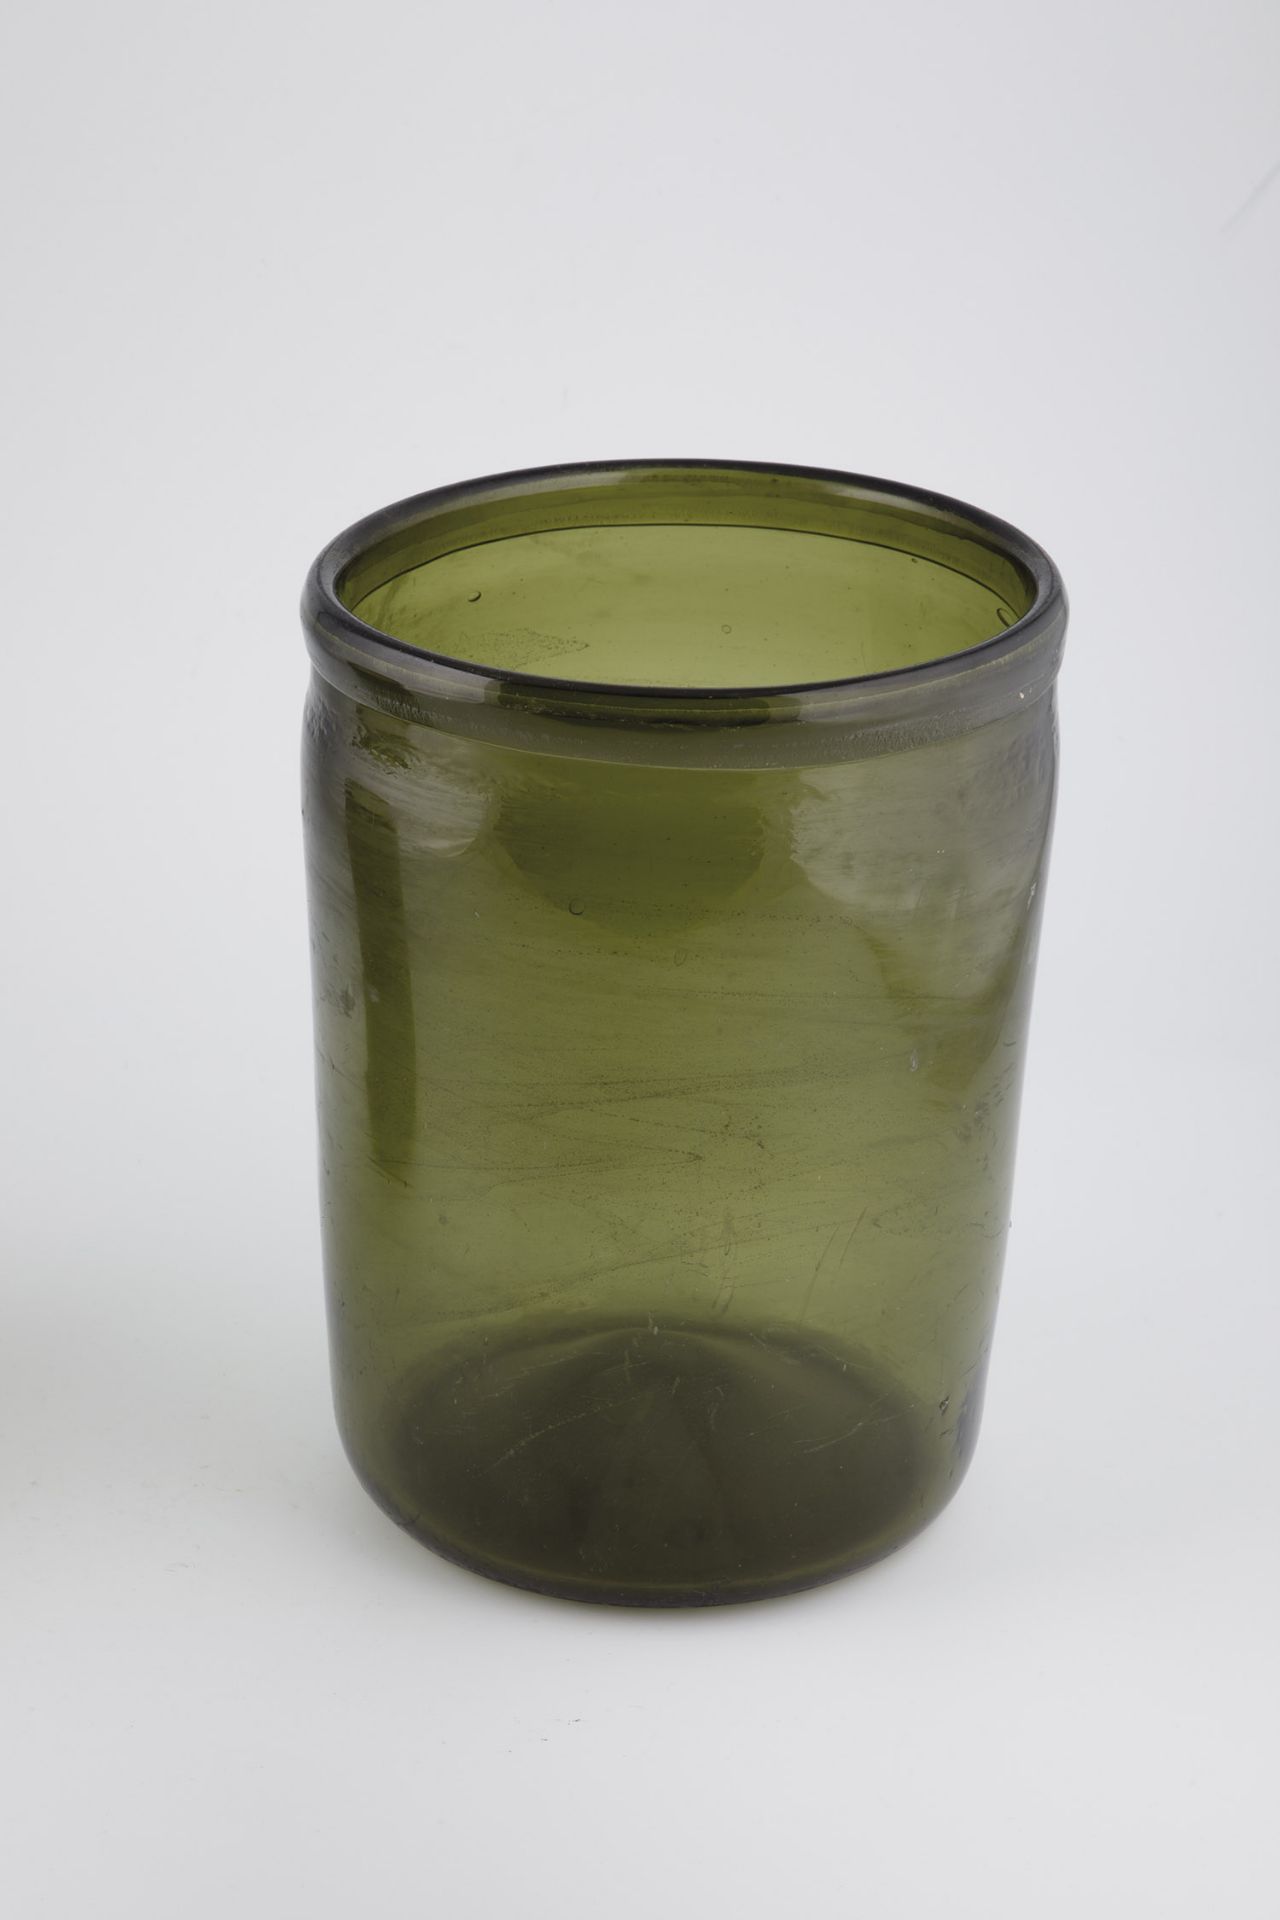 Storage vessel (harbour) Weserbergland, ca. 1800 Green glass with demolition. Cylindrical wall,